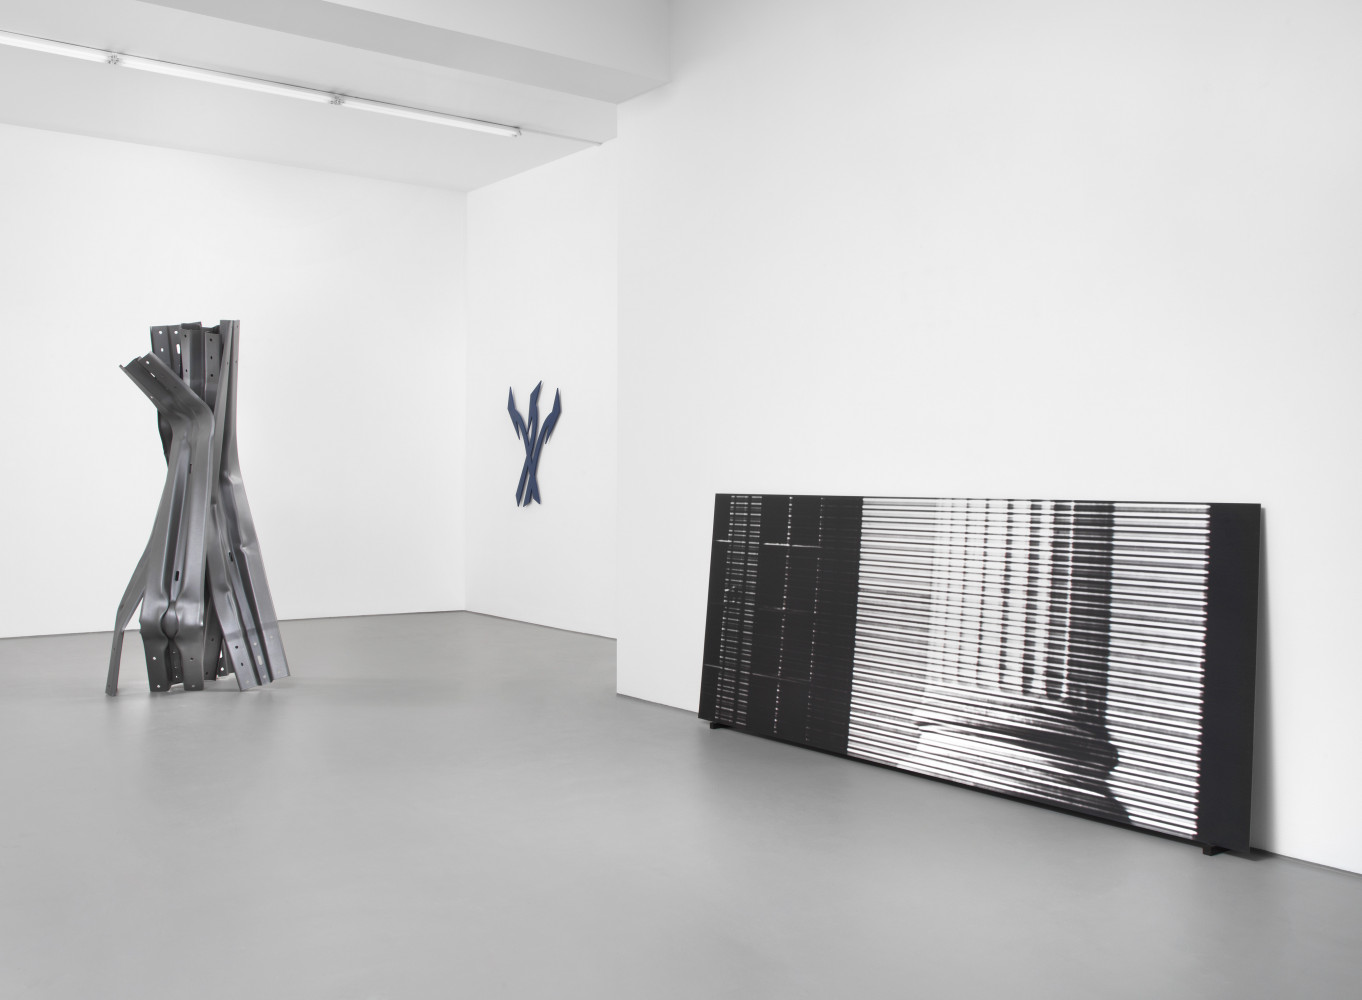 Bettina Pousttchi, ‘Bettina Pousttchi – Directions’, Installation view, Buchmann Galerie, 2021